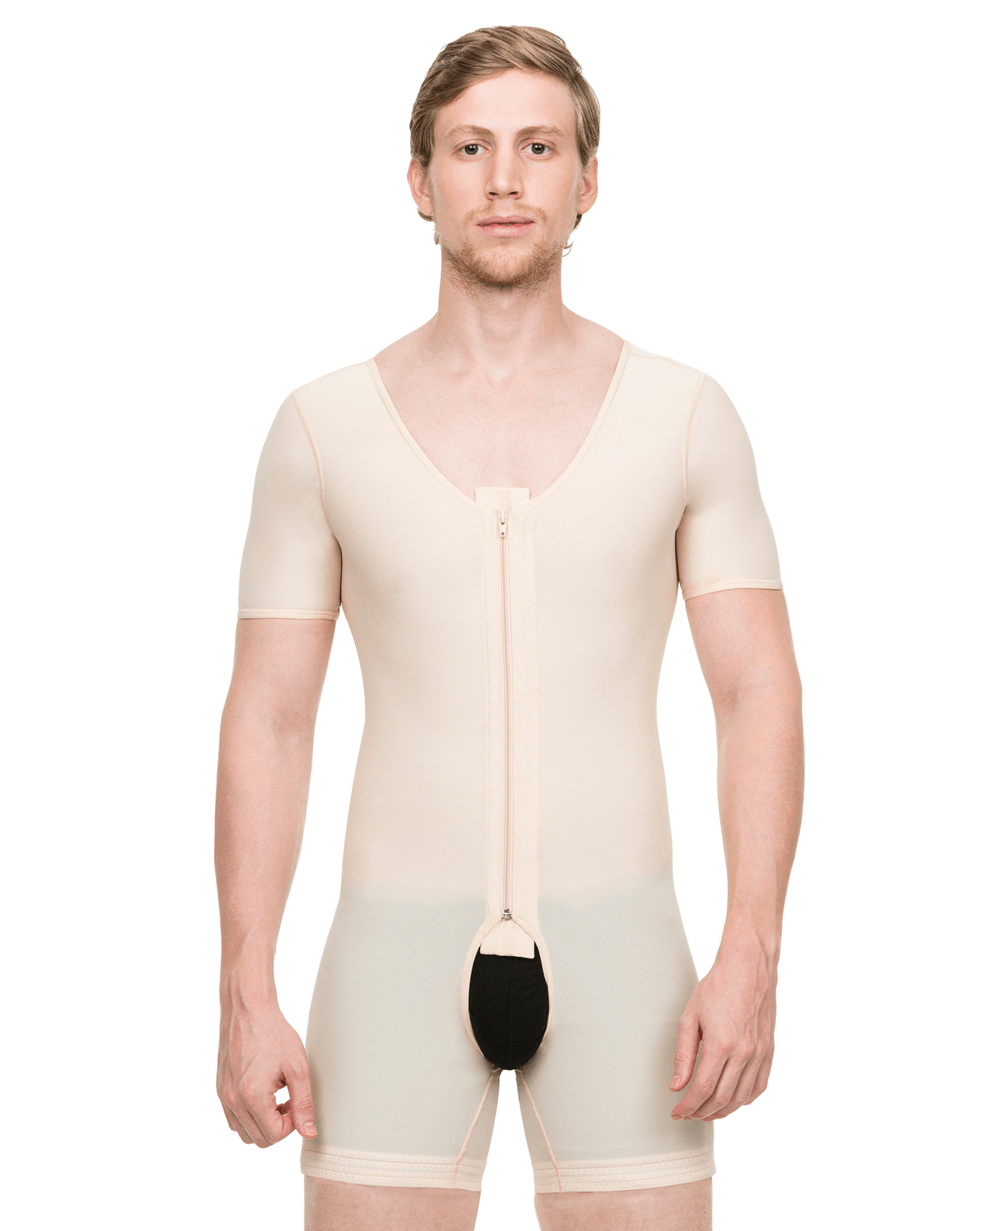 Isavela Body Suit Below the Knee Length W/Suspender Closed Buttocks Enhancing  Compression Girdle W/Zipper (BE07-BK) (XS, Beige) at  Women's  Clothing store